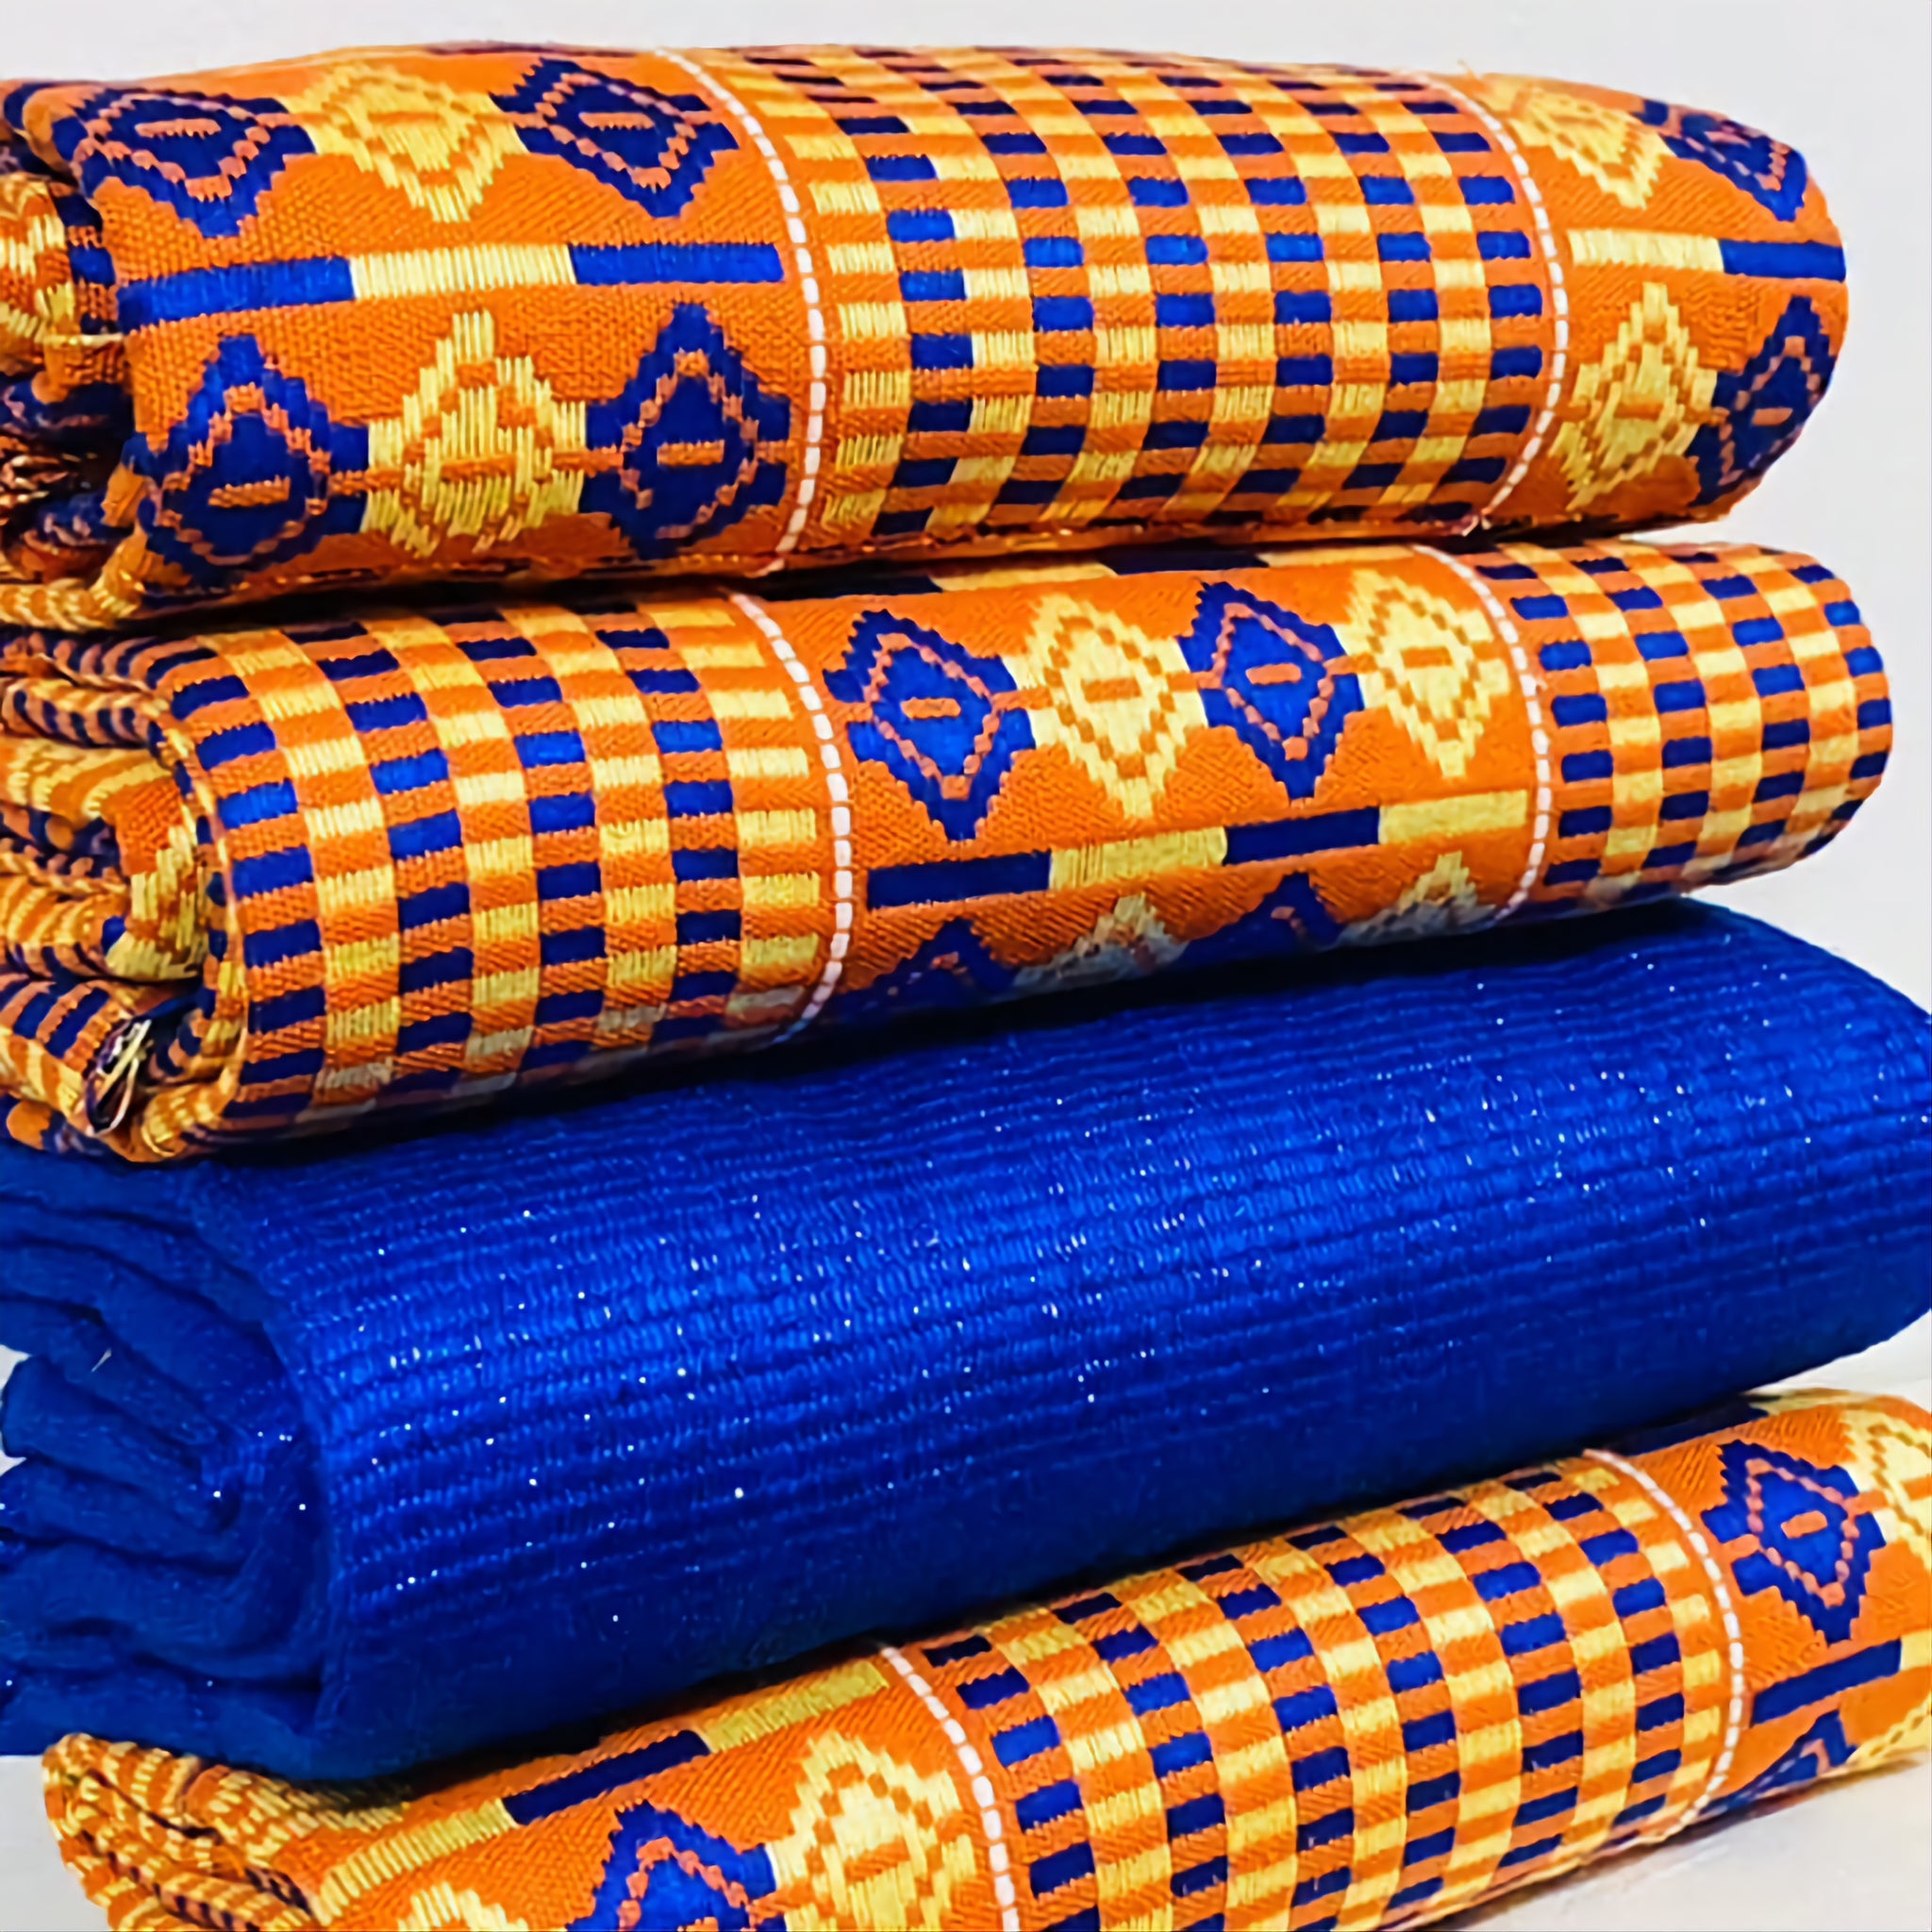 MG Authentic Hand Weaved Kente Cloth A2522